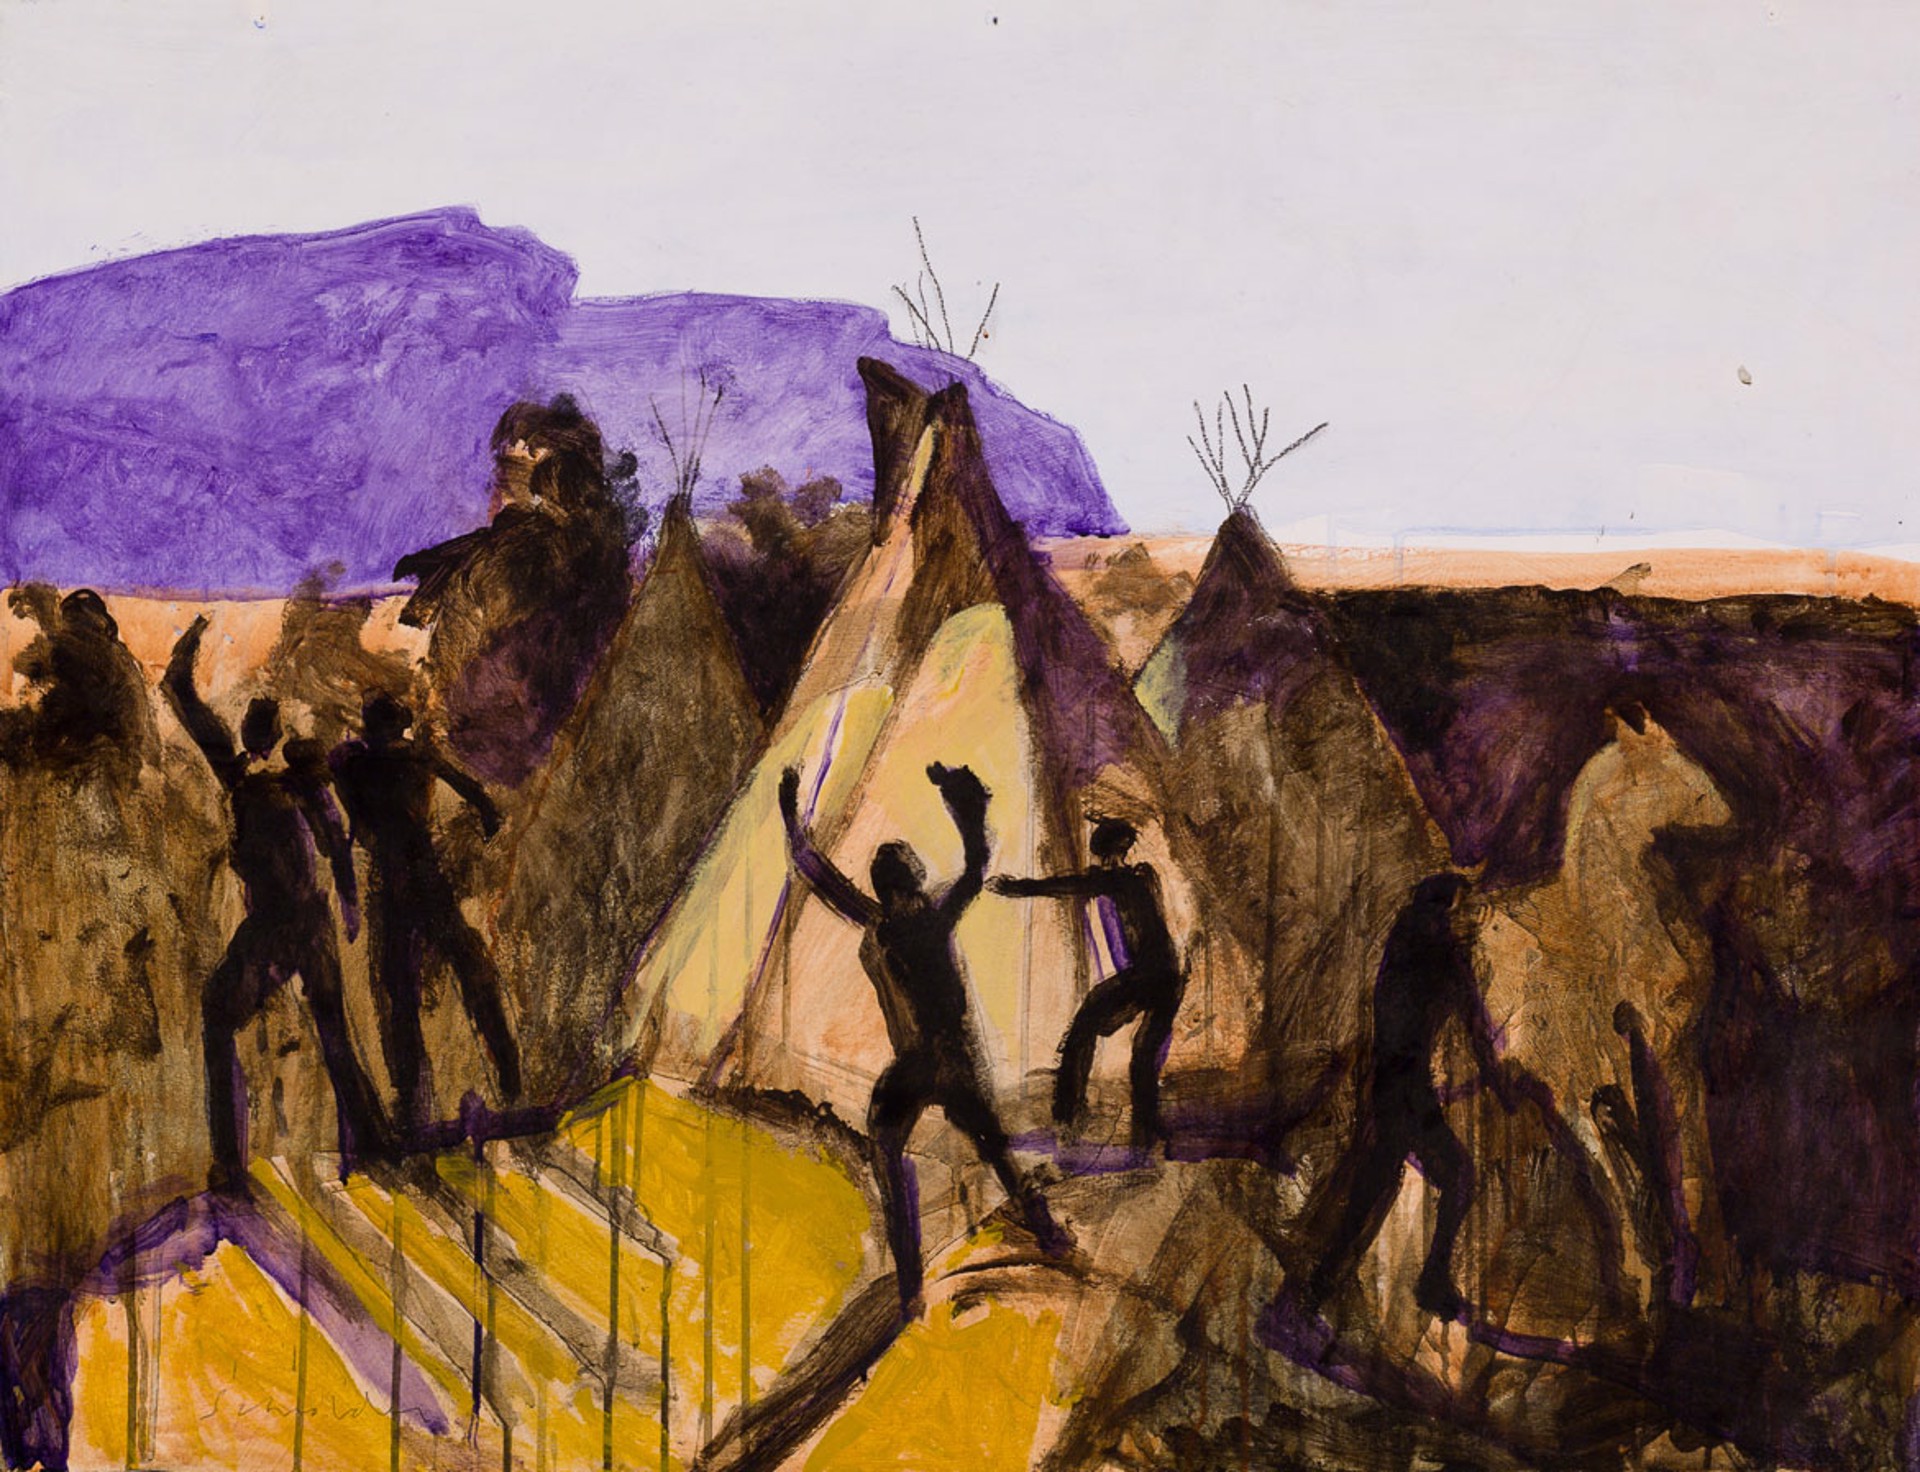 Untitled (Indians) by Fritz Scholder